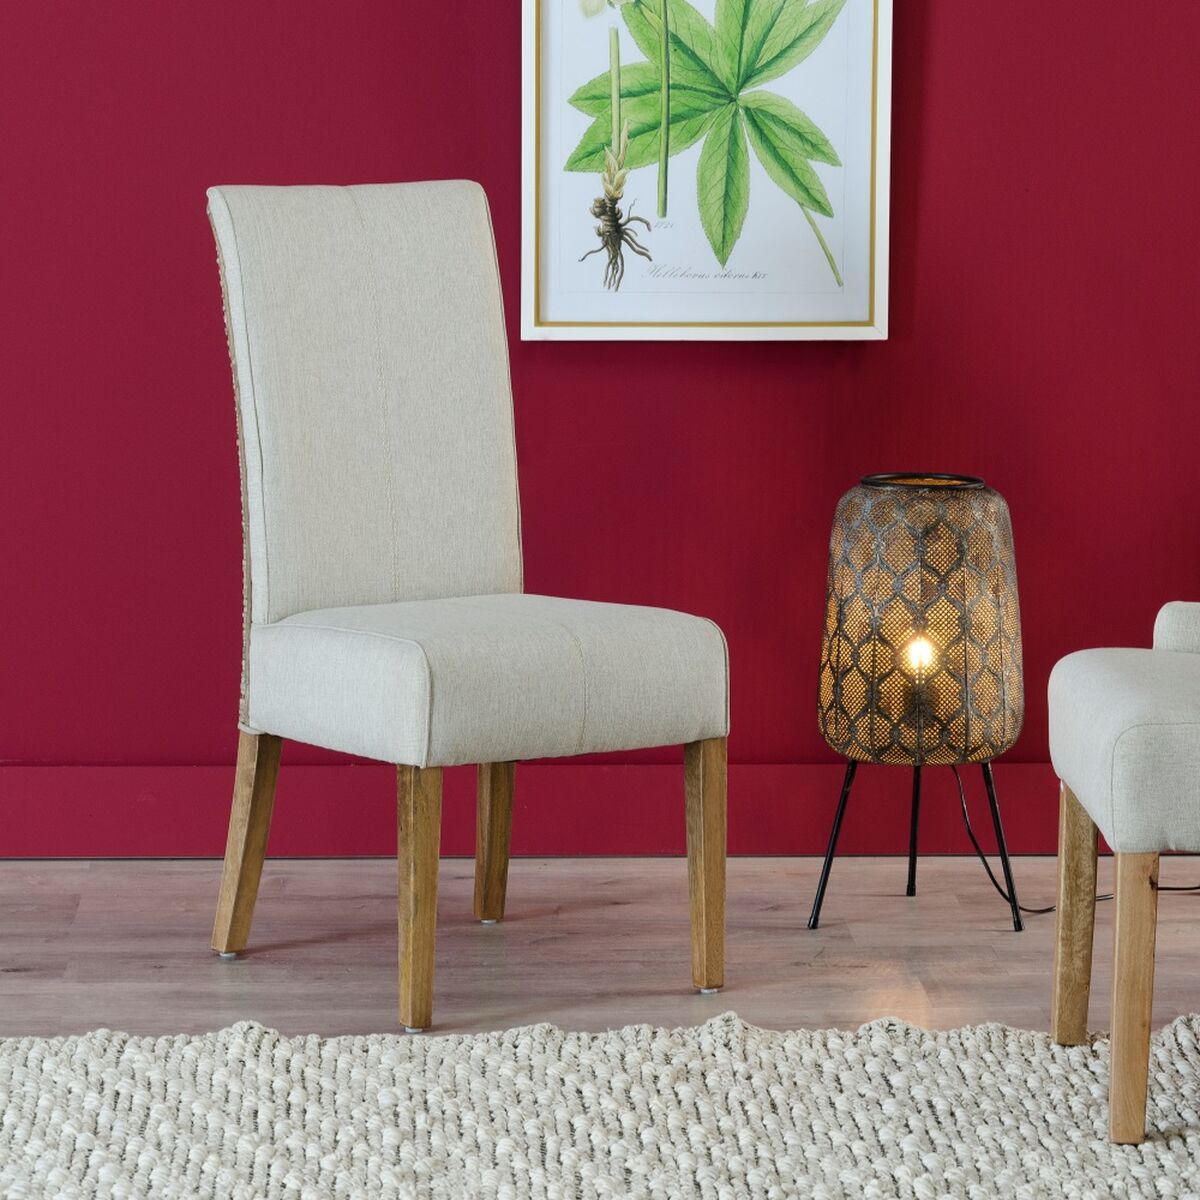 Beige Dining Chair with Wooden Legs (46 x 62 x 100 cm)